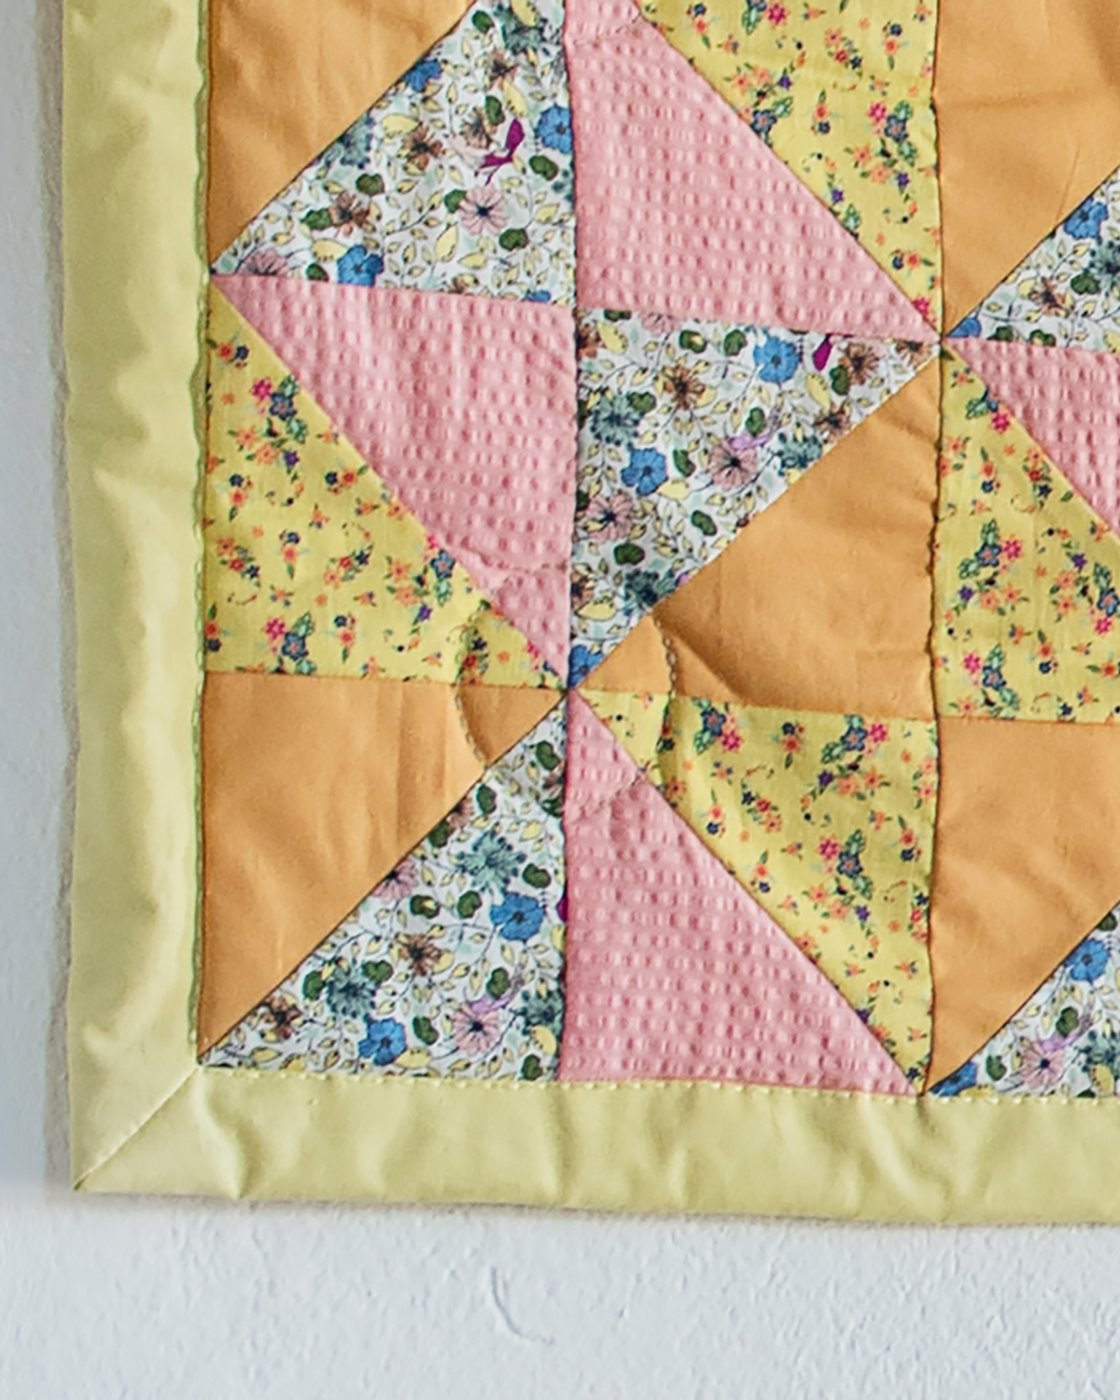 How to edge a patchwork quilt DIY9018_edge_patchwork_quilt.jpg